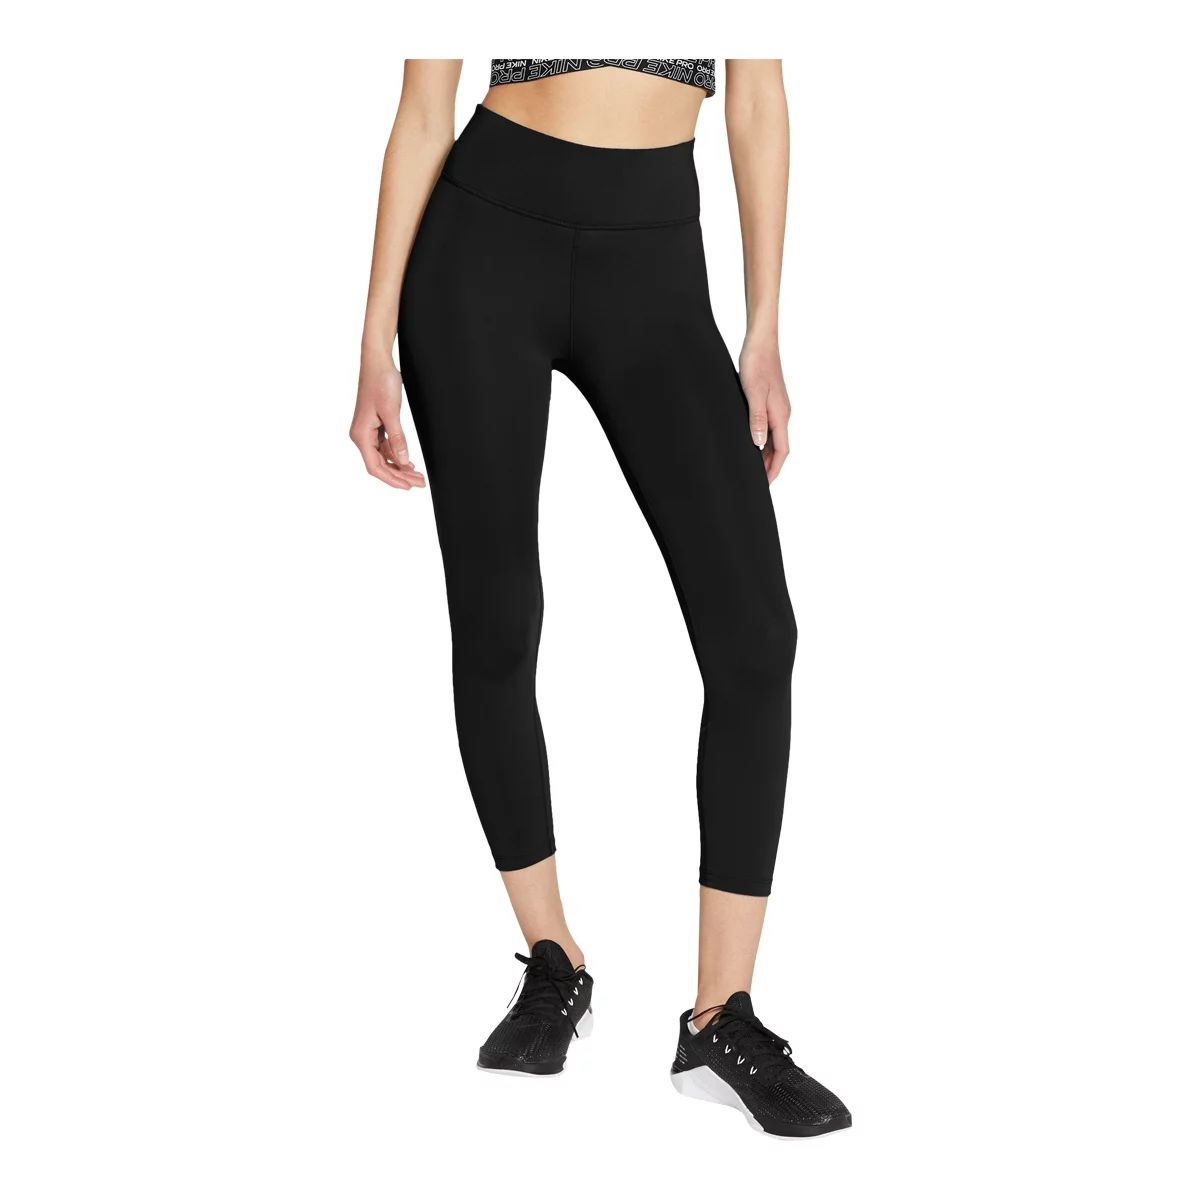 Nike Women's One Mid Rise 2.0 Tights